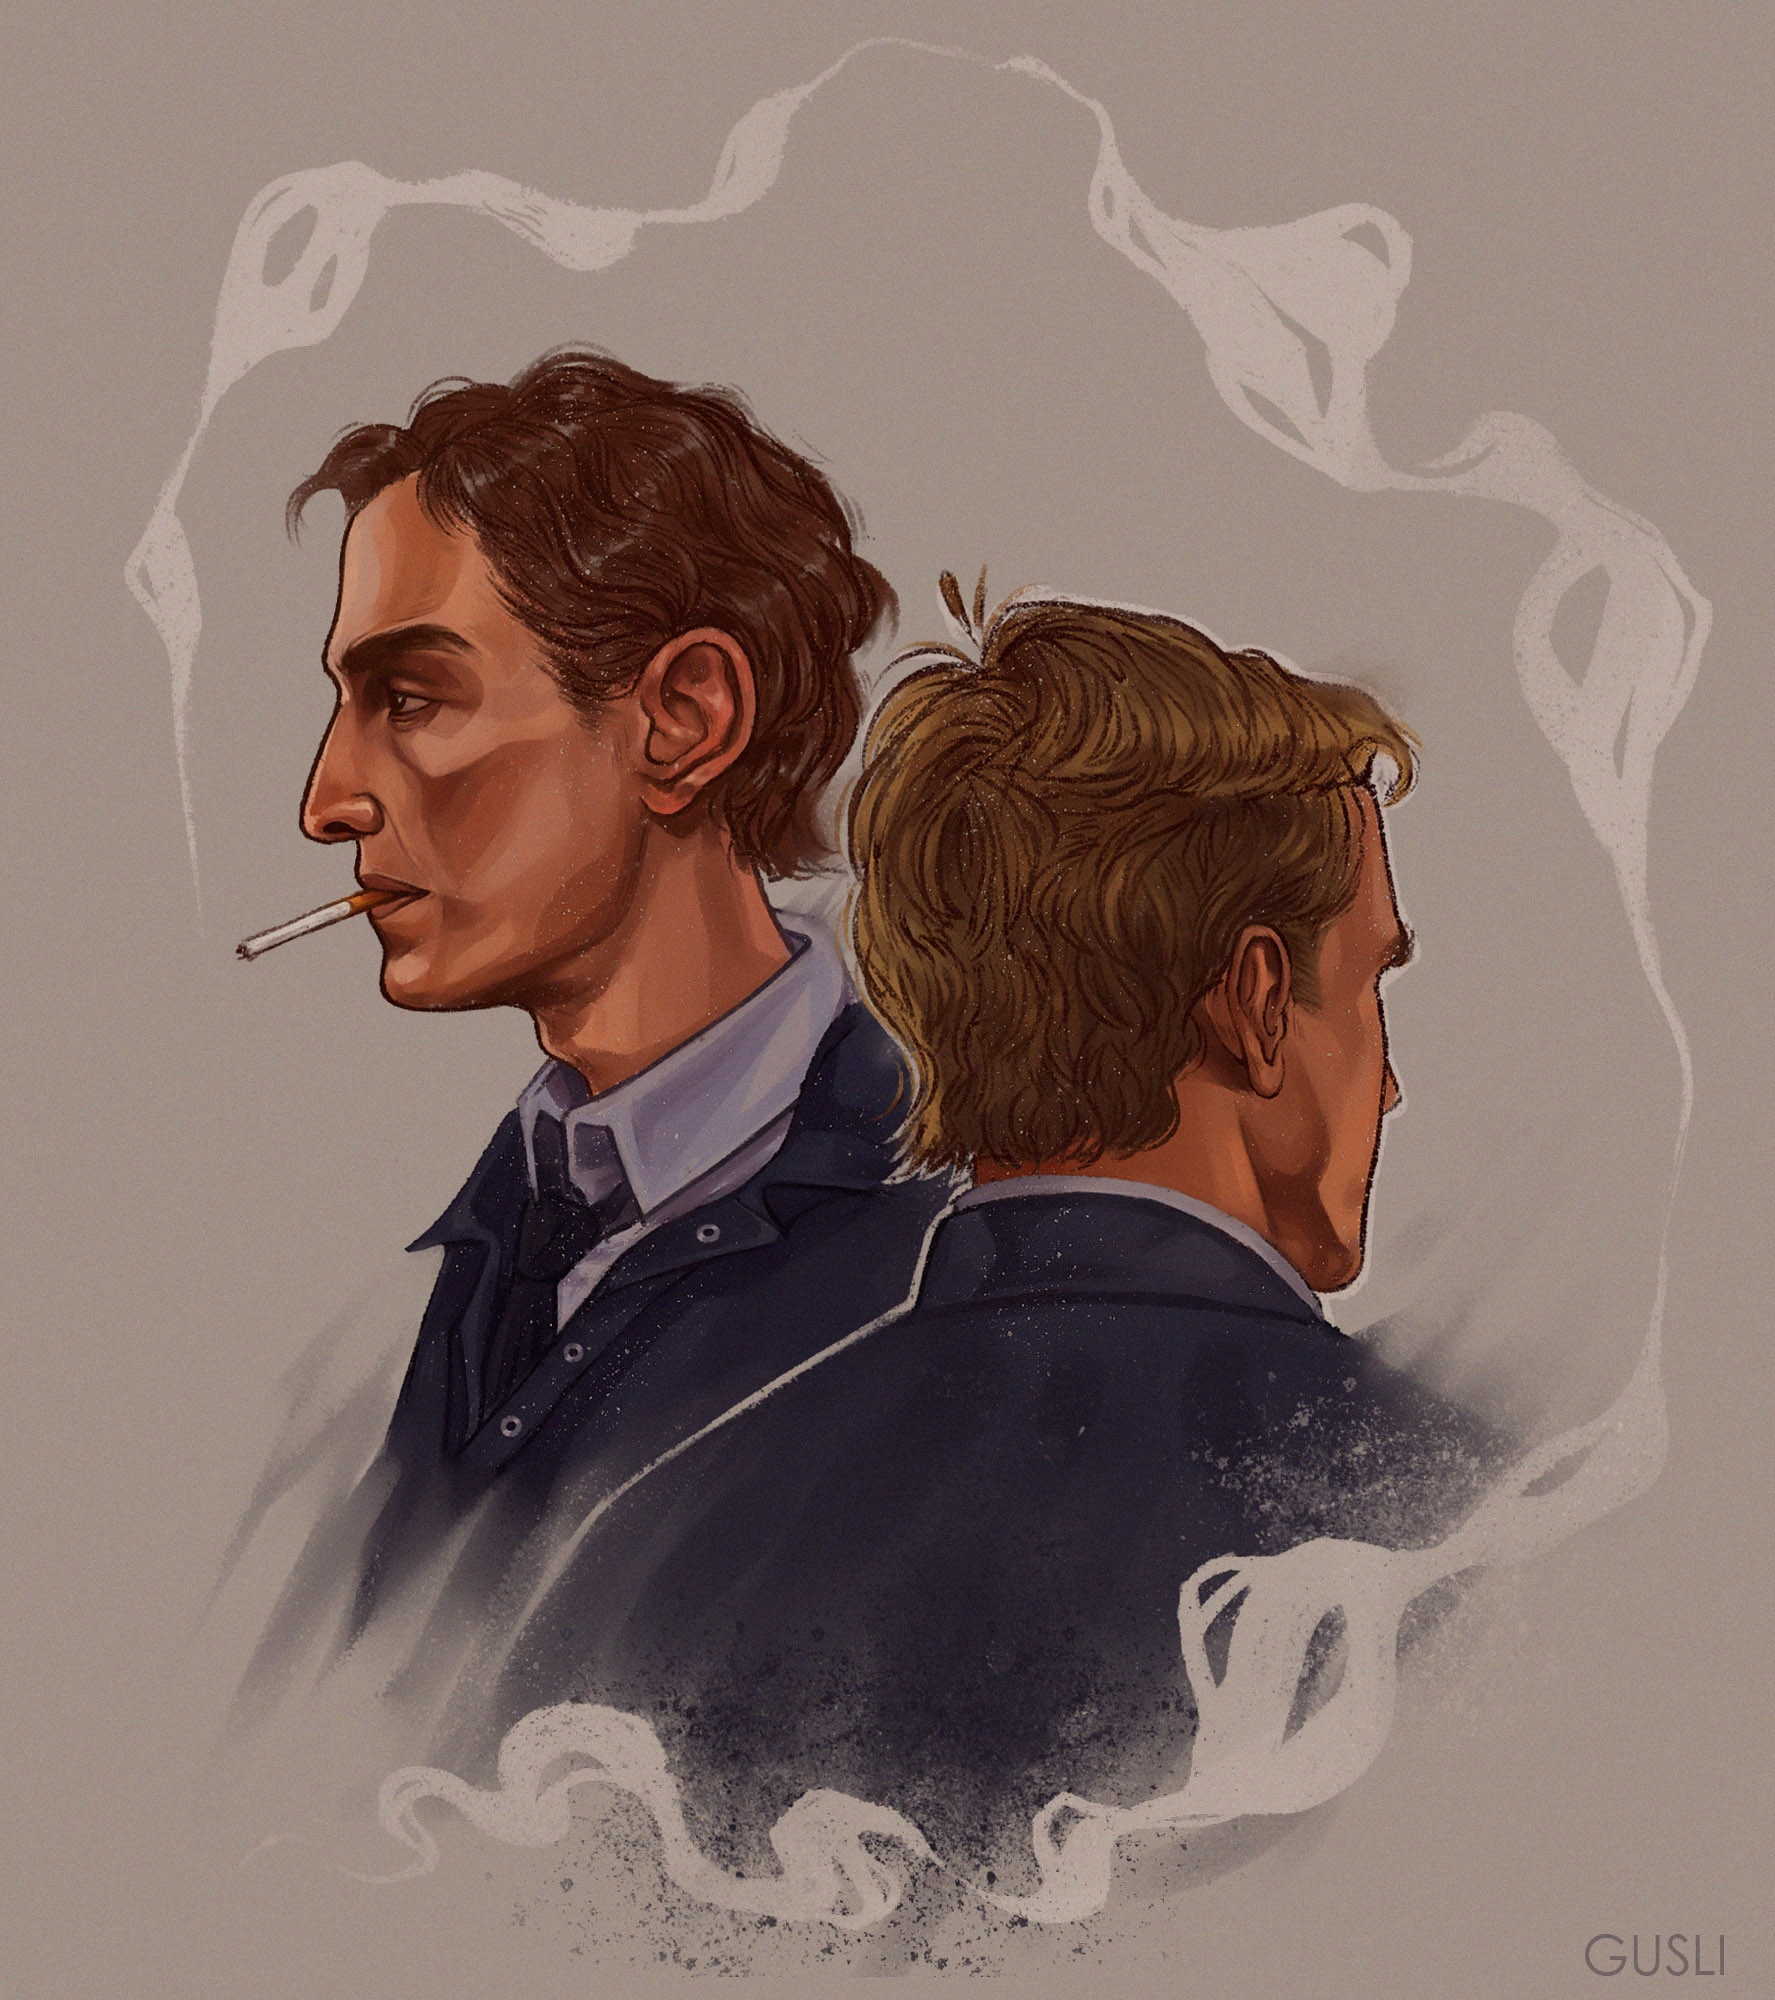 Rust cohle and marty